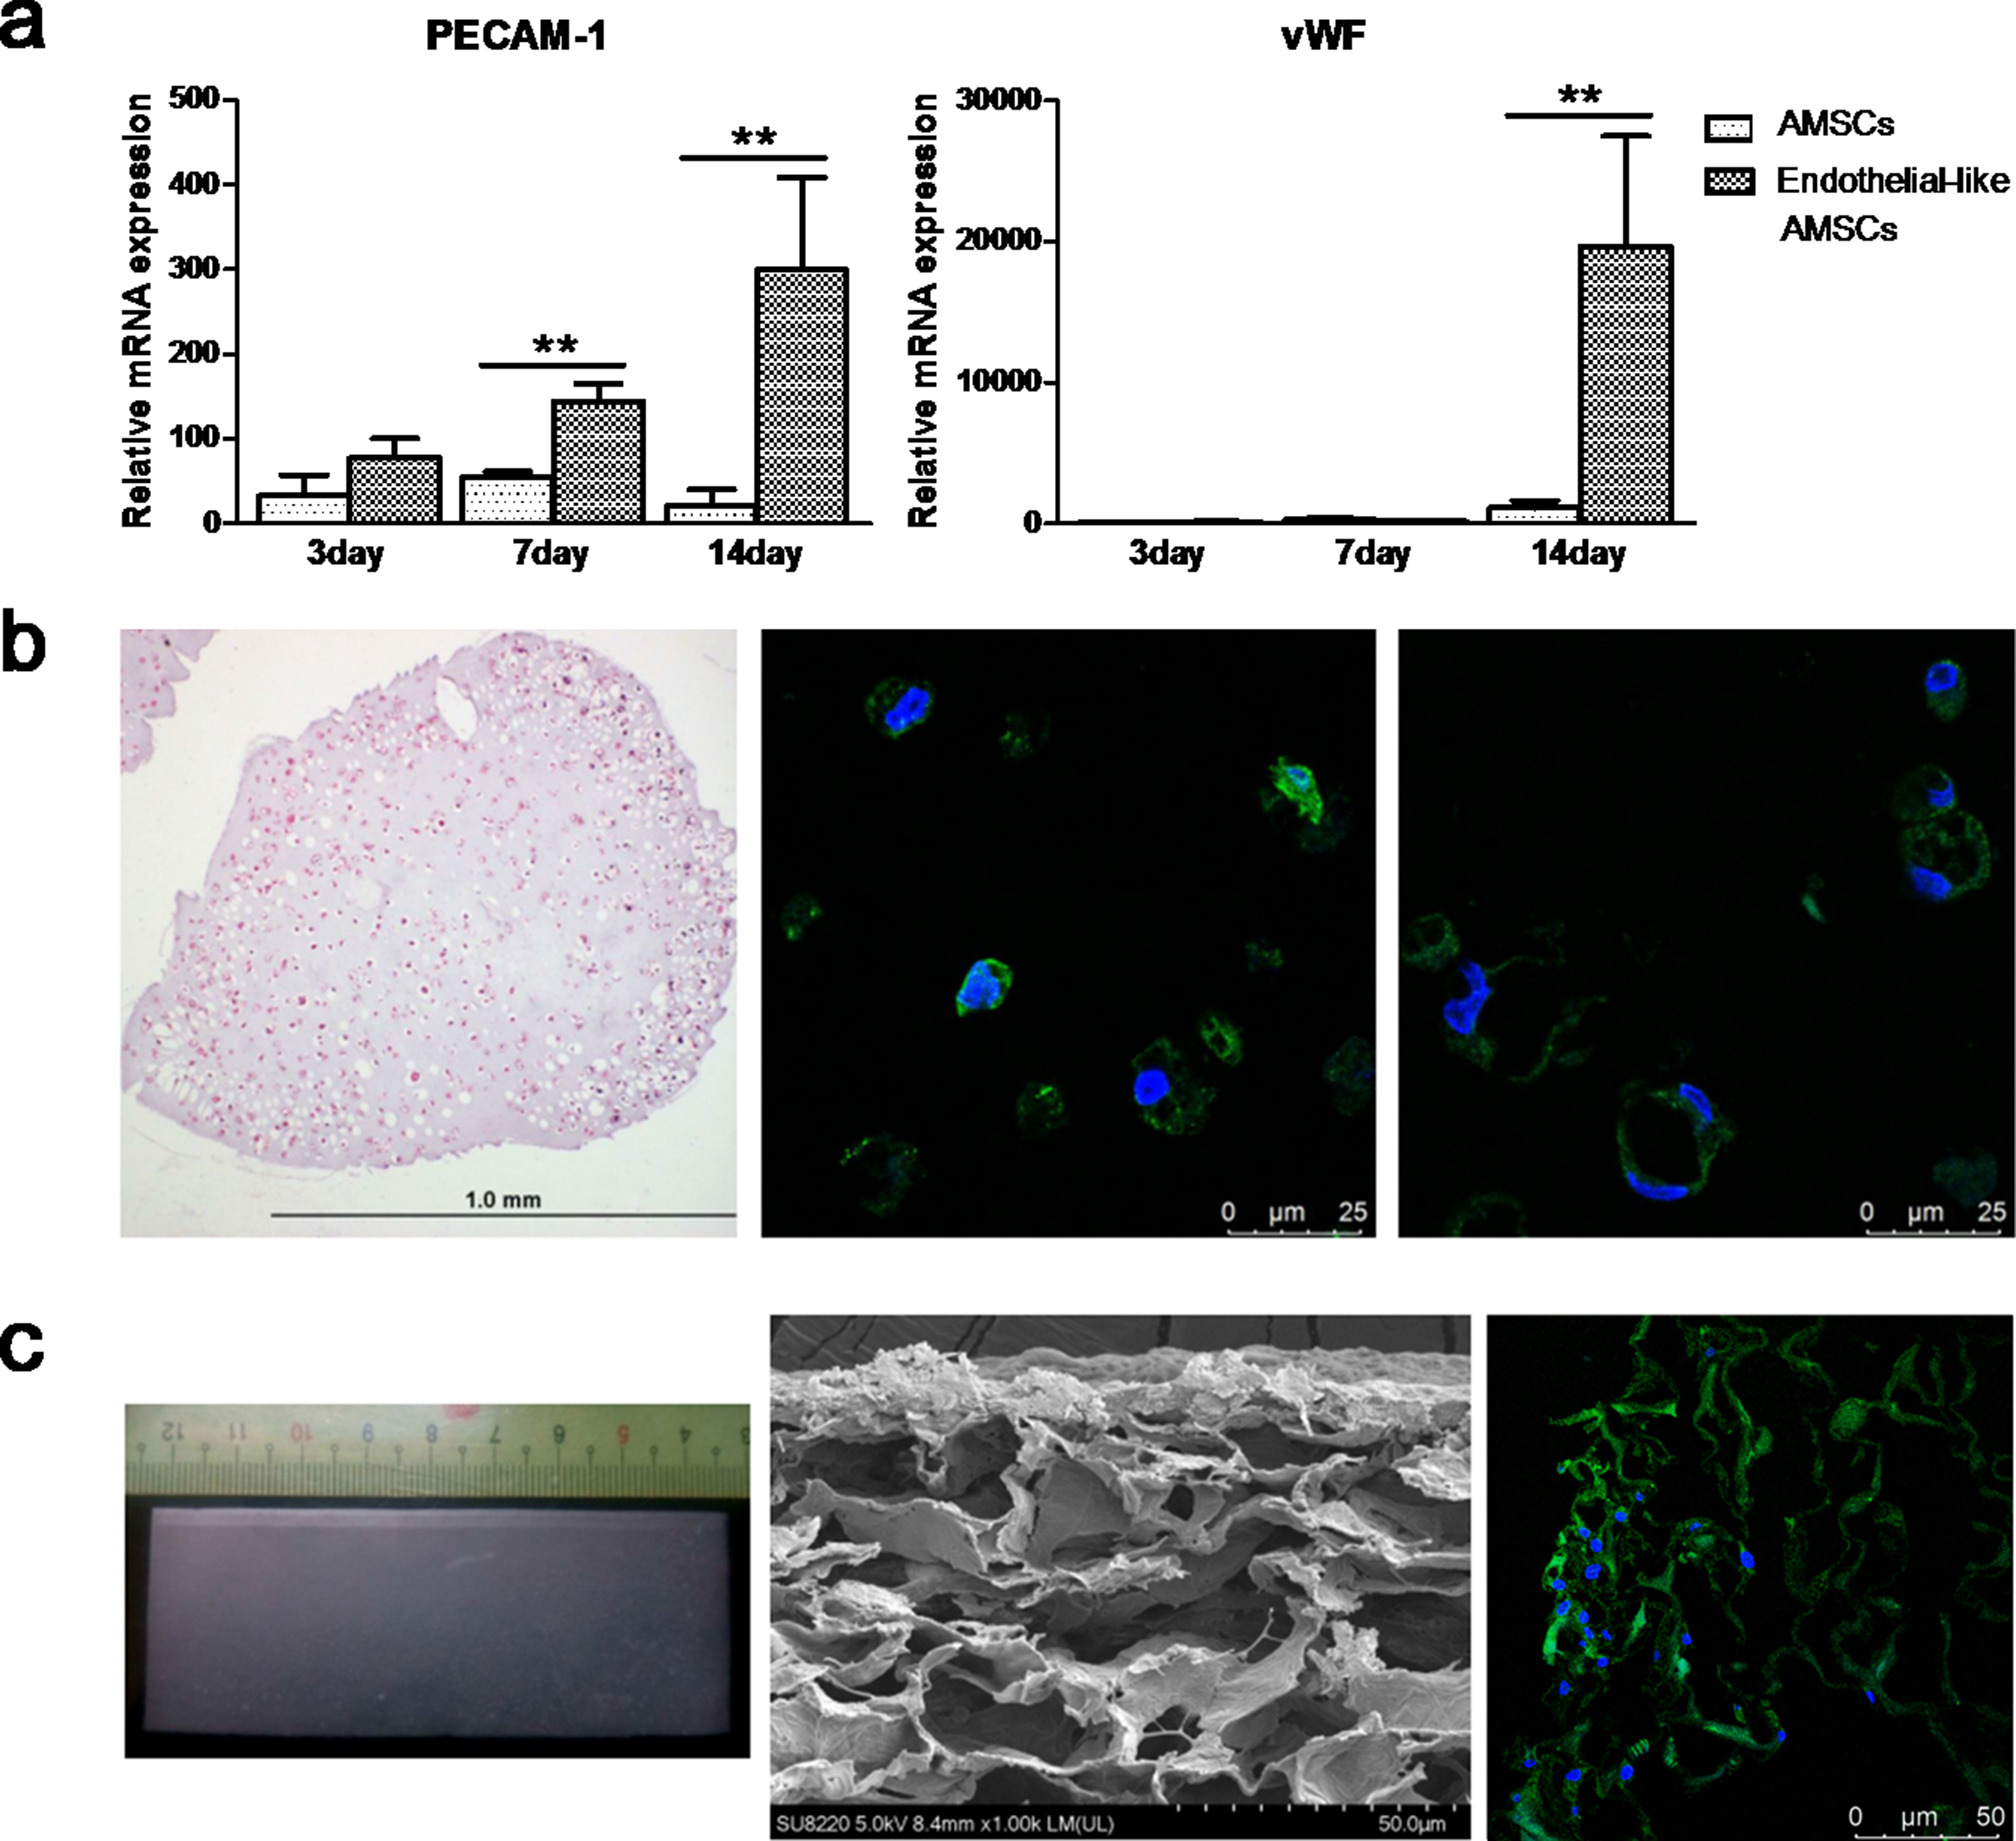 Fig. 4 
            Differentiation of adipose-derived mesenchymal stem cells (AMSCs) into endothelial-like cells in alginate beads and AMSCs seeded in collagen/chitosan sheet. a) Platelet endothelial cell adhesion molecule-1 (PECAM-1) and vWF messenger RNA (mRNA) expression showed notable upregulation after endothelial differentiation and increased sequentially by cultivation duration, especially at day 14. b) Haematoxylin & eosin staining of alginate beads seeded with epithelial-differentiated AMSCs after 14 days’ induction. The immunofluorescent staining of PECAM-1 and vWF expression confirmed the capability of angiogenesis. c) Gross appearance, scanning electron microscopy, and fluorescent confocal analyses of the cell seeded collagen/chitosan sheet. **p < 0.001.
          